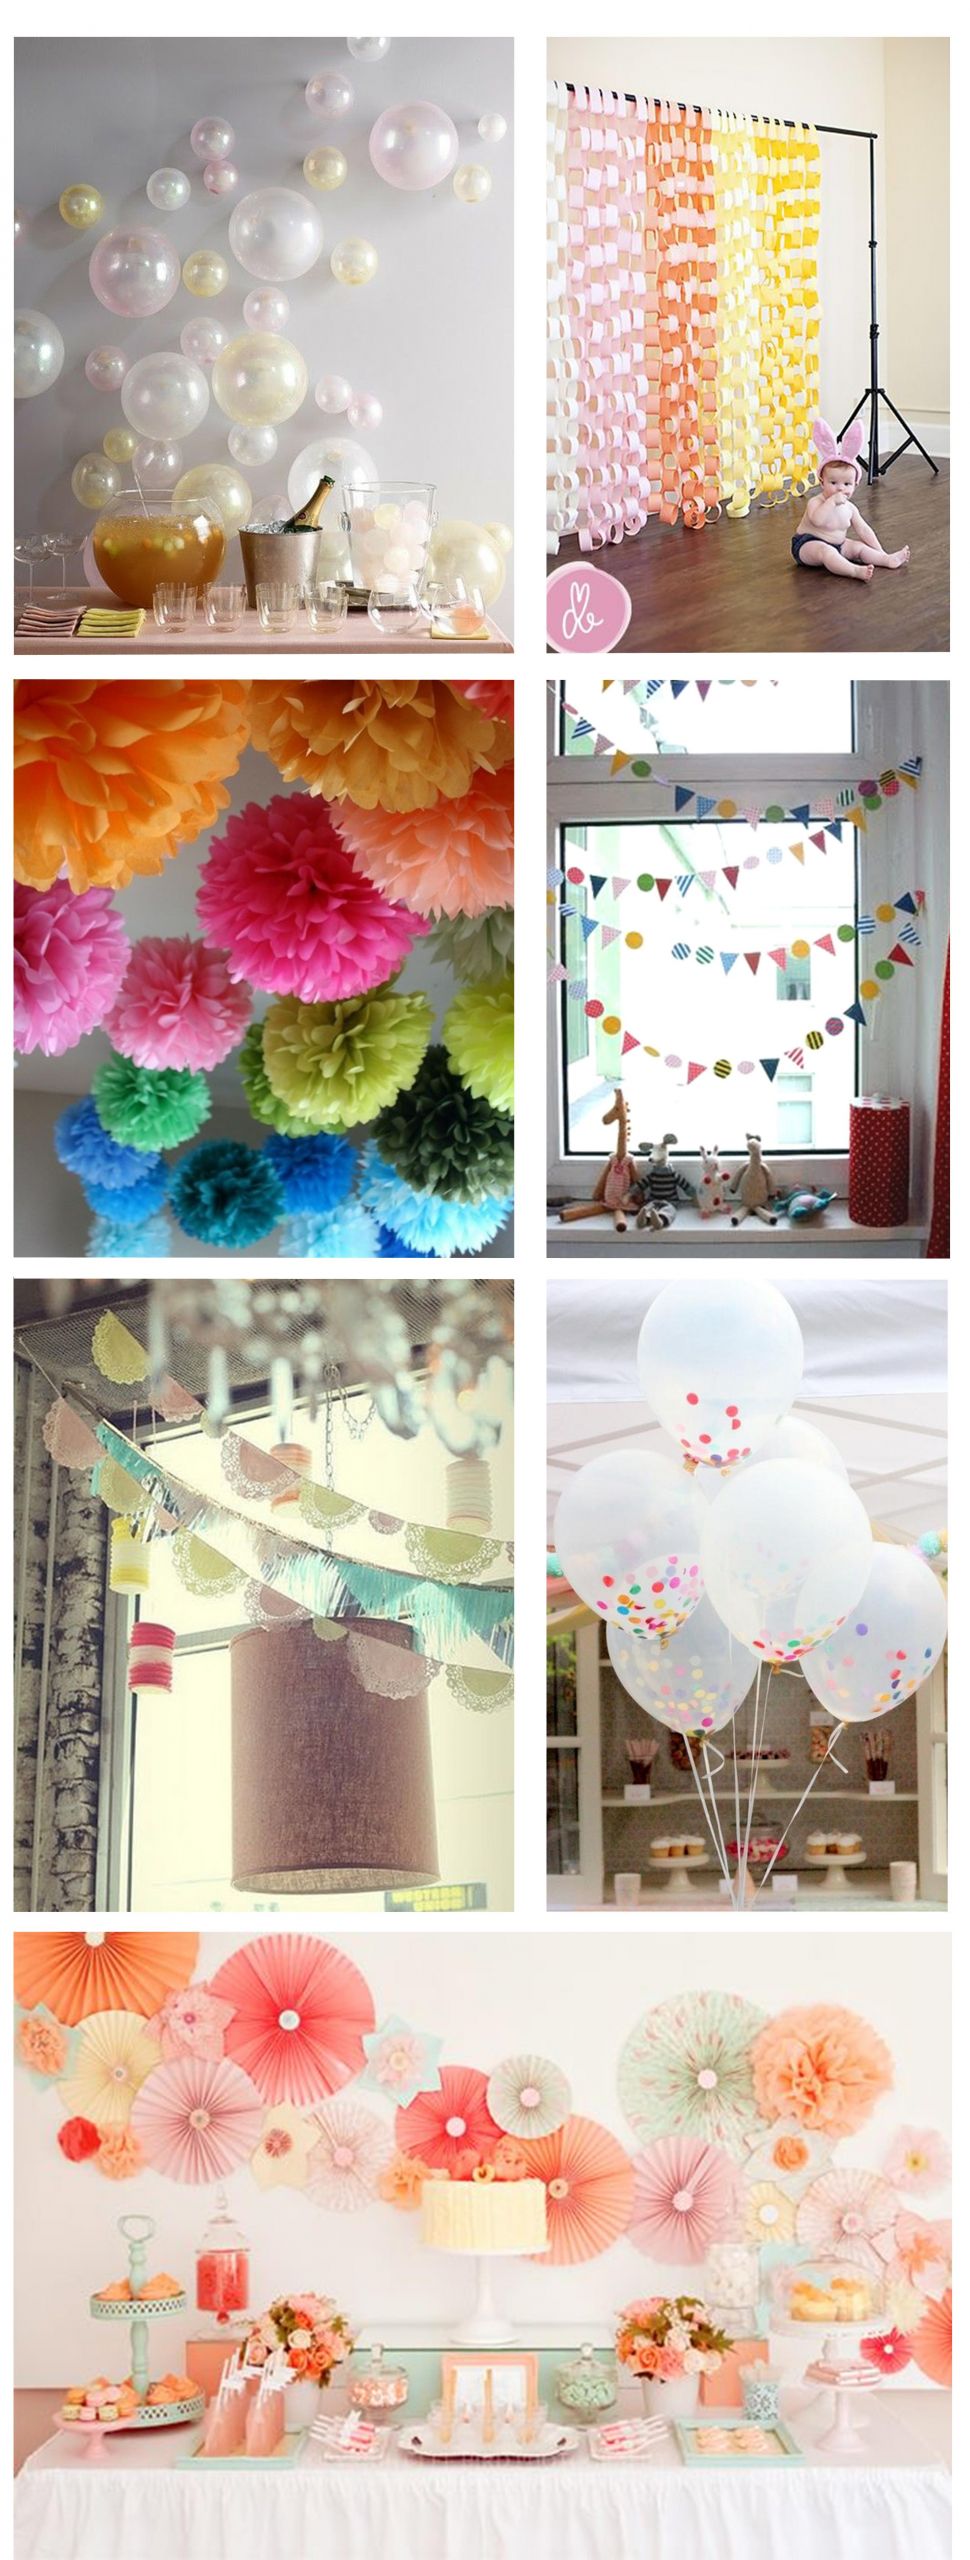 Birthday Decorations At Home
 Ideas for home made party decorations